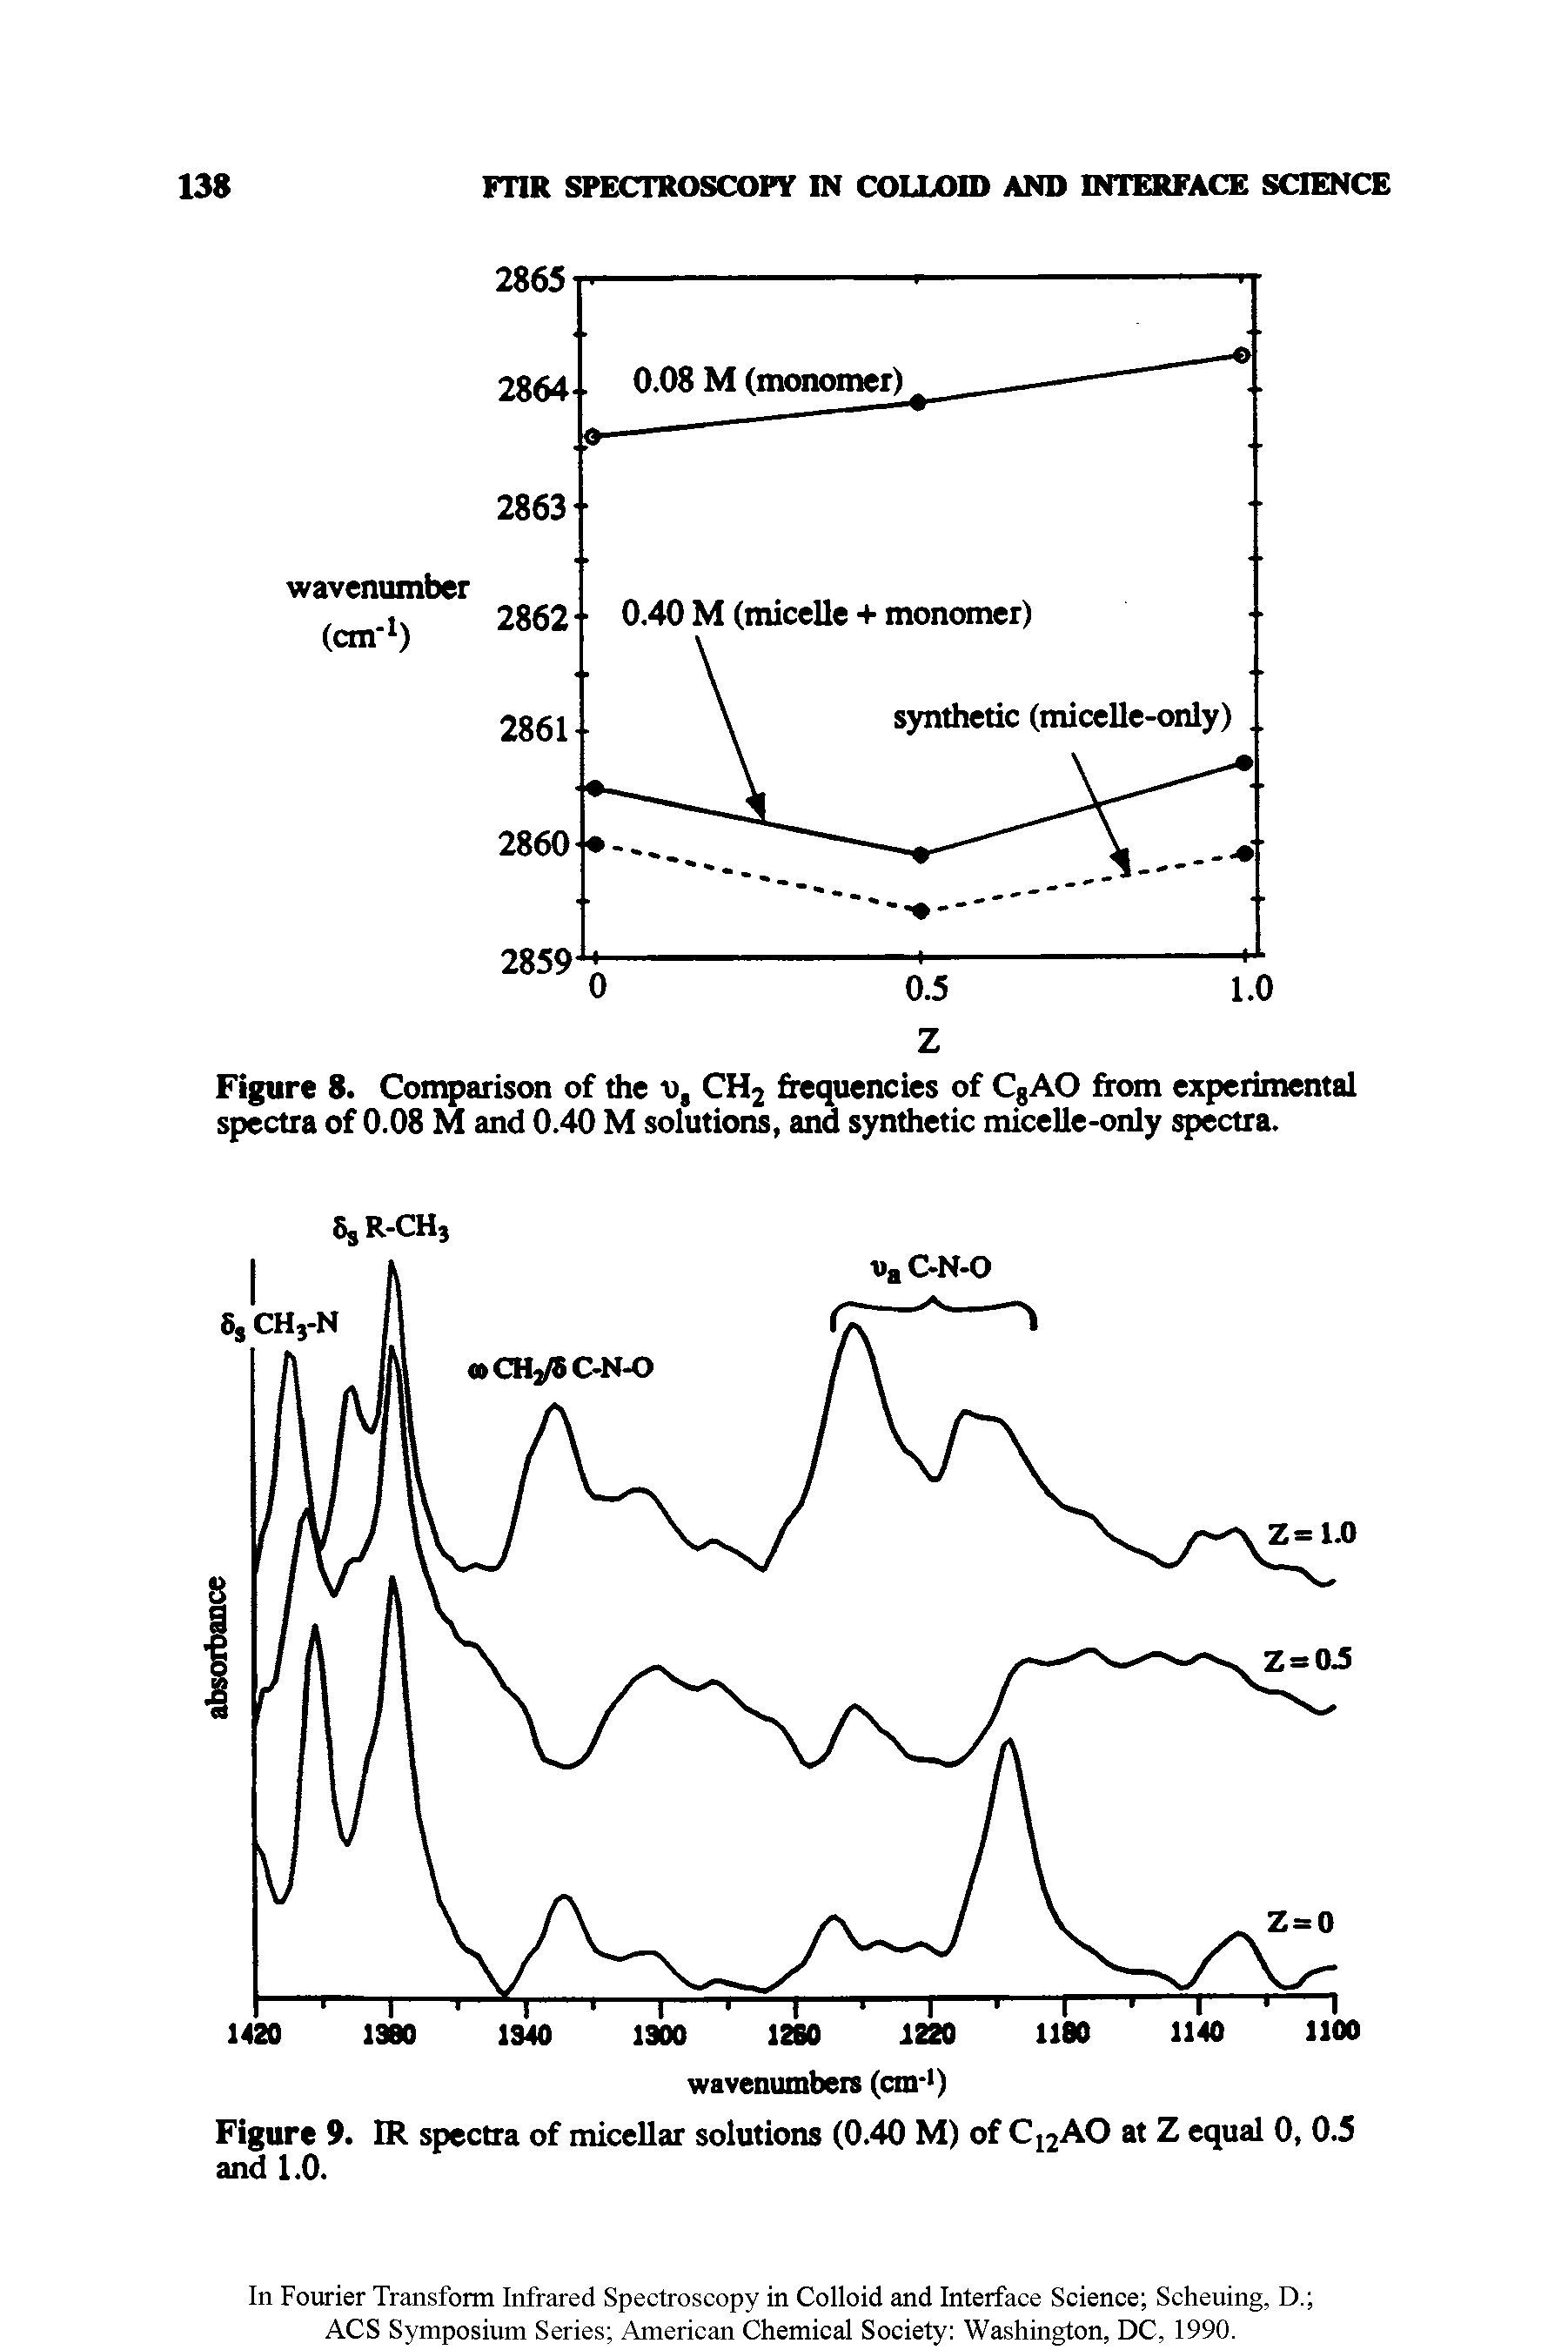 Figure 8. Comparison of the o, CH2 frequencies of CgAO from experimental spectra of 0.08 M and 0.40 M solutions, and synthetic micelle-only spectra.